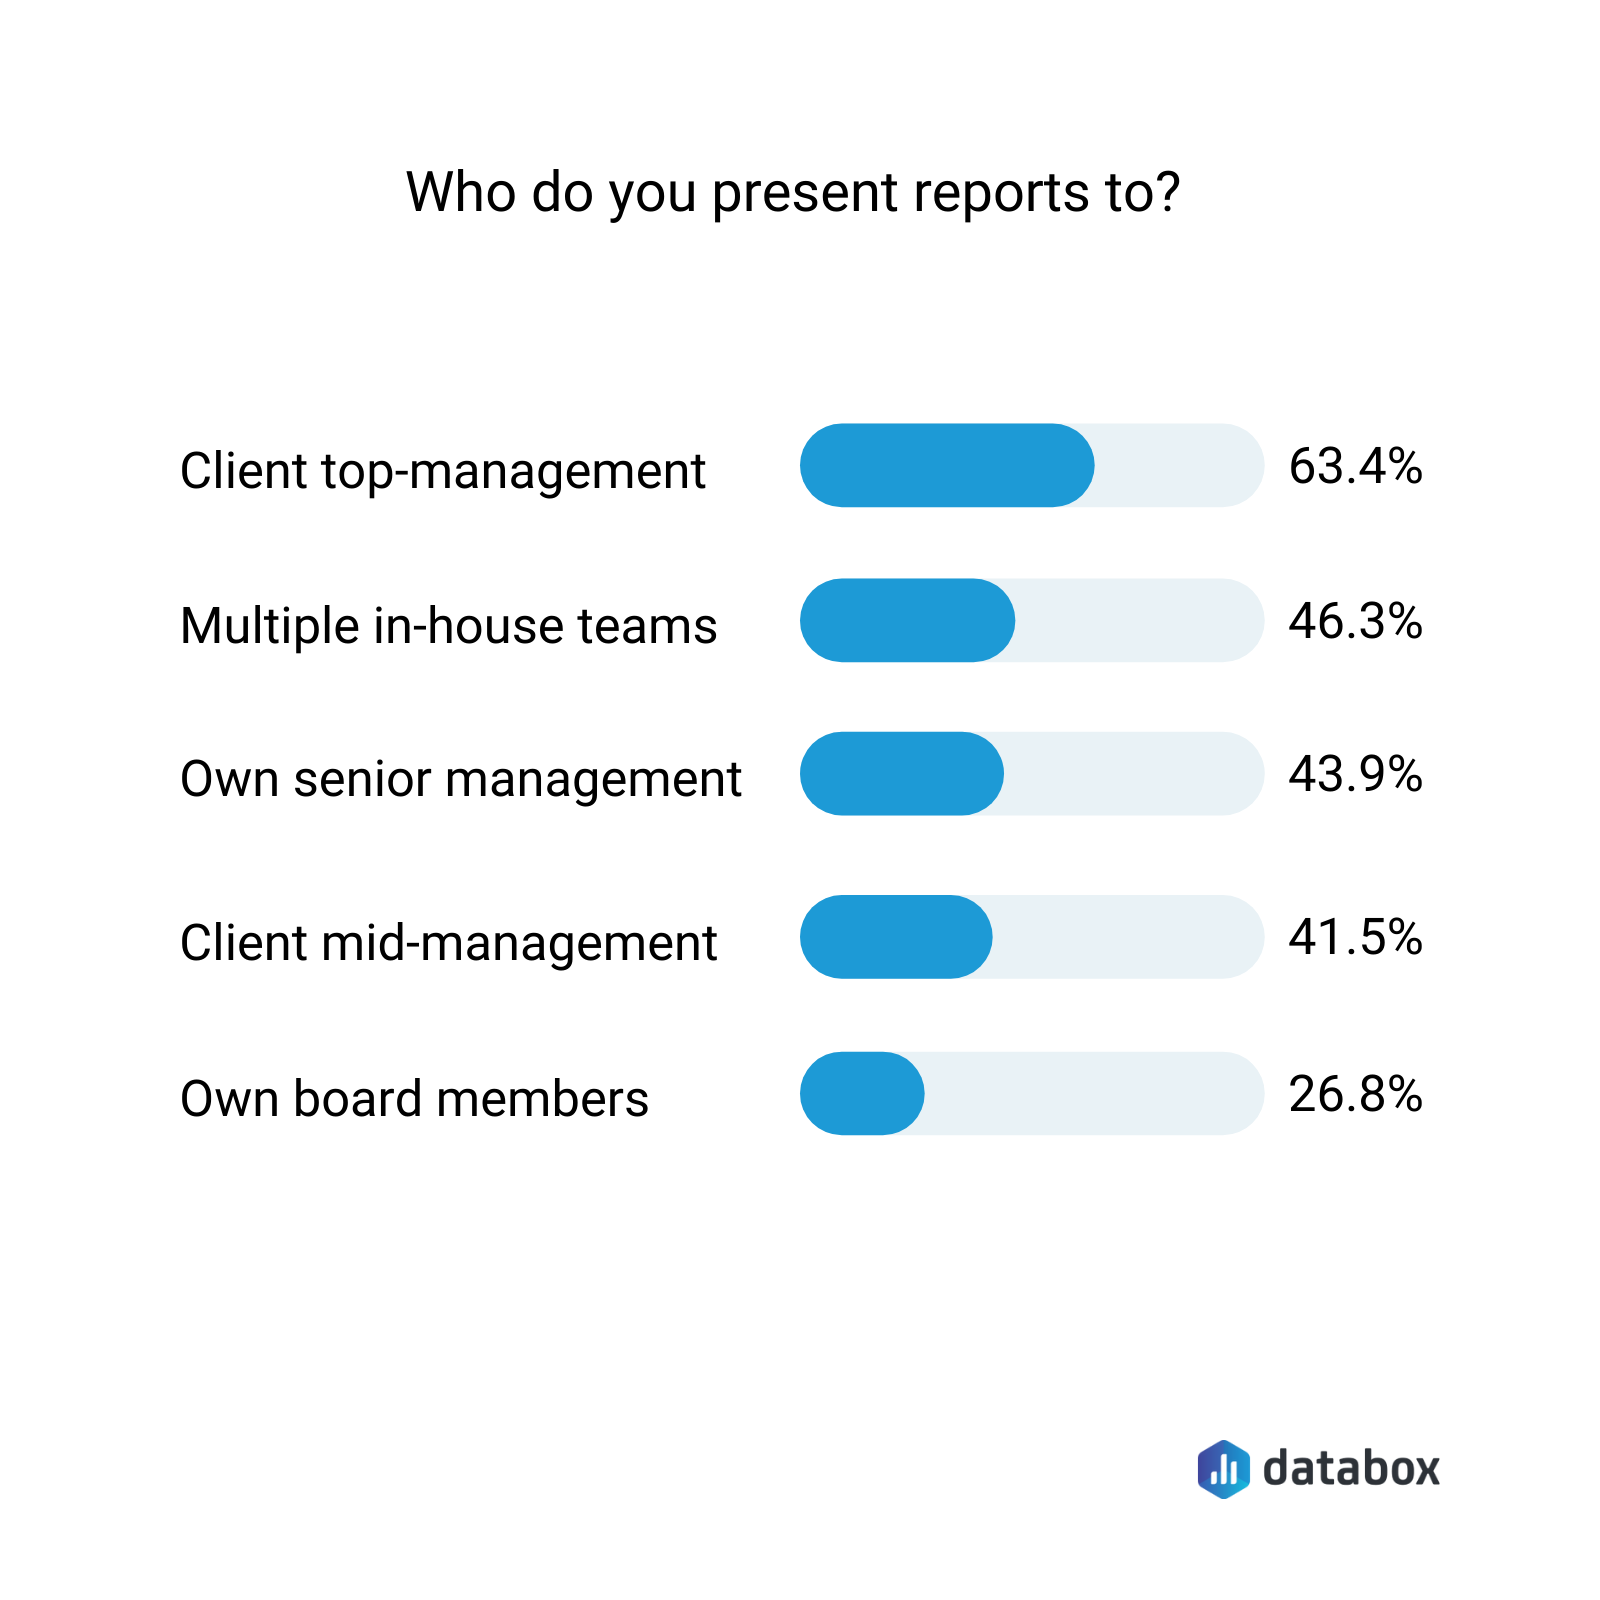 who do you present your reports to? 